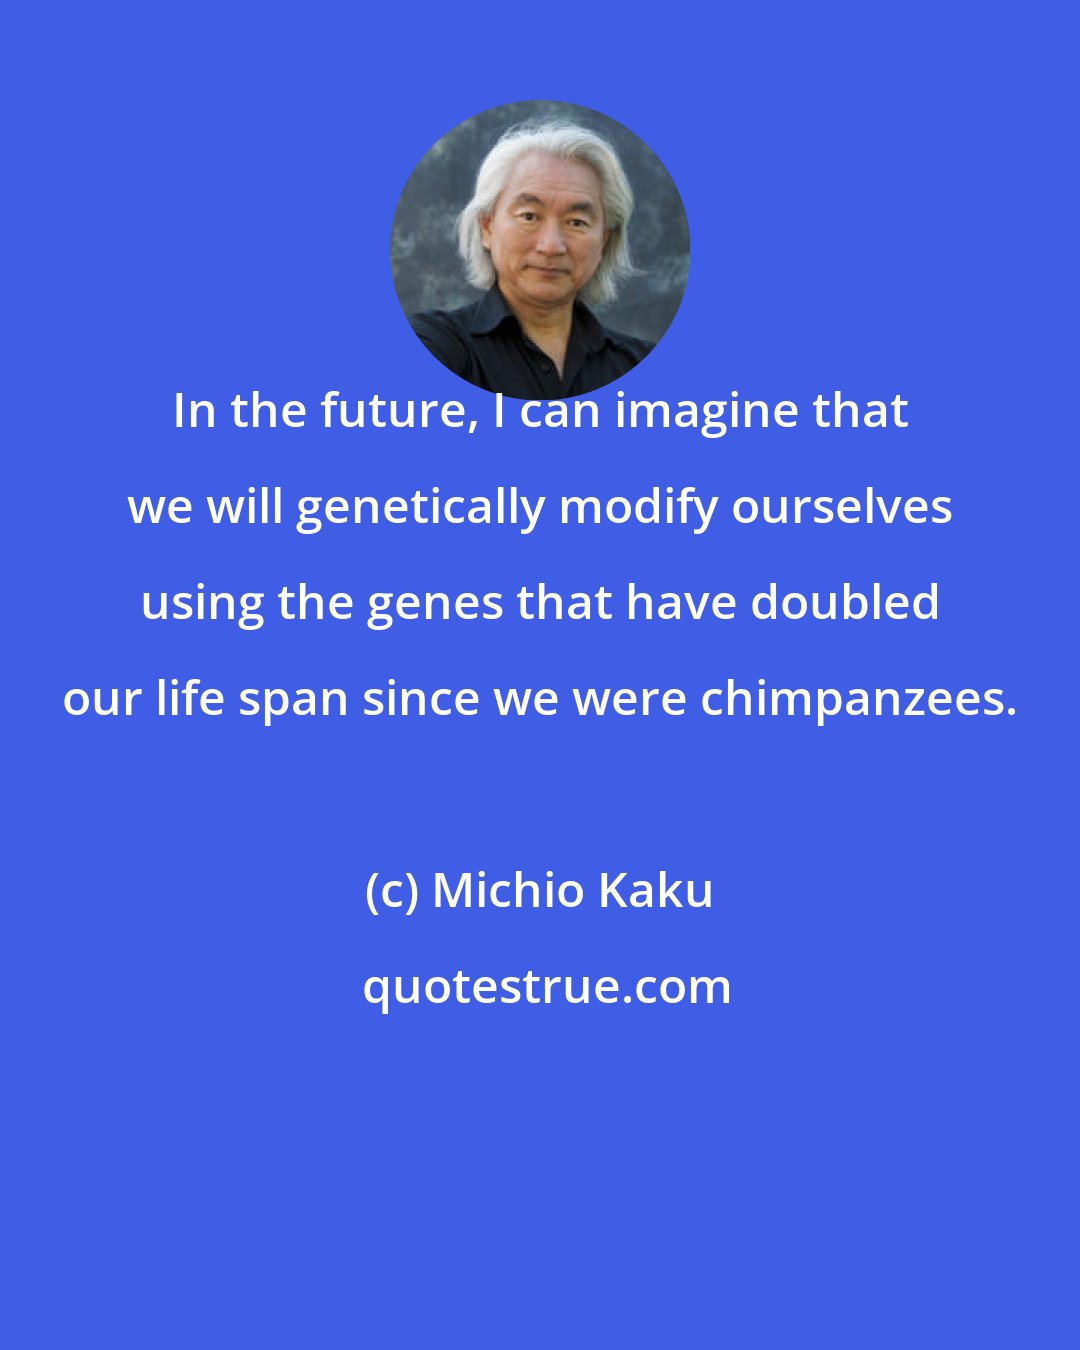 Michio Kaku: In the future, I can imagine that we will genetically modify ourselves using the genes that have doubled our life span since we were chimpanzees.